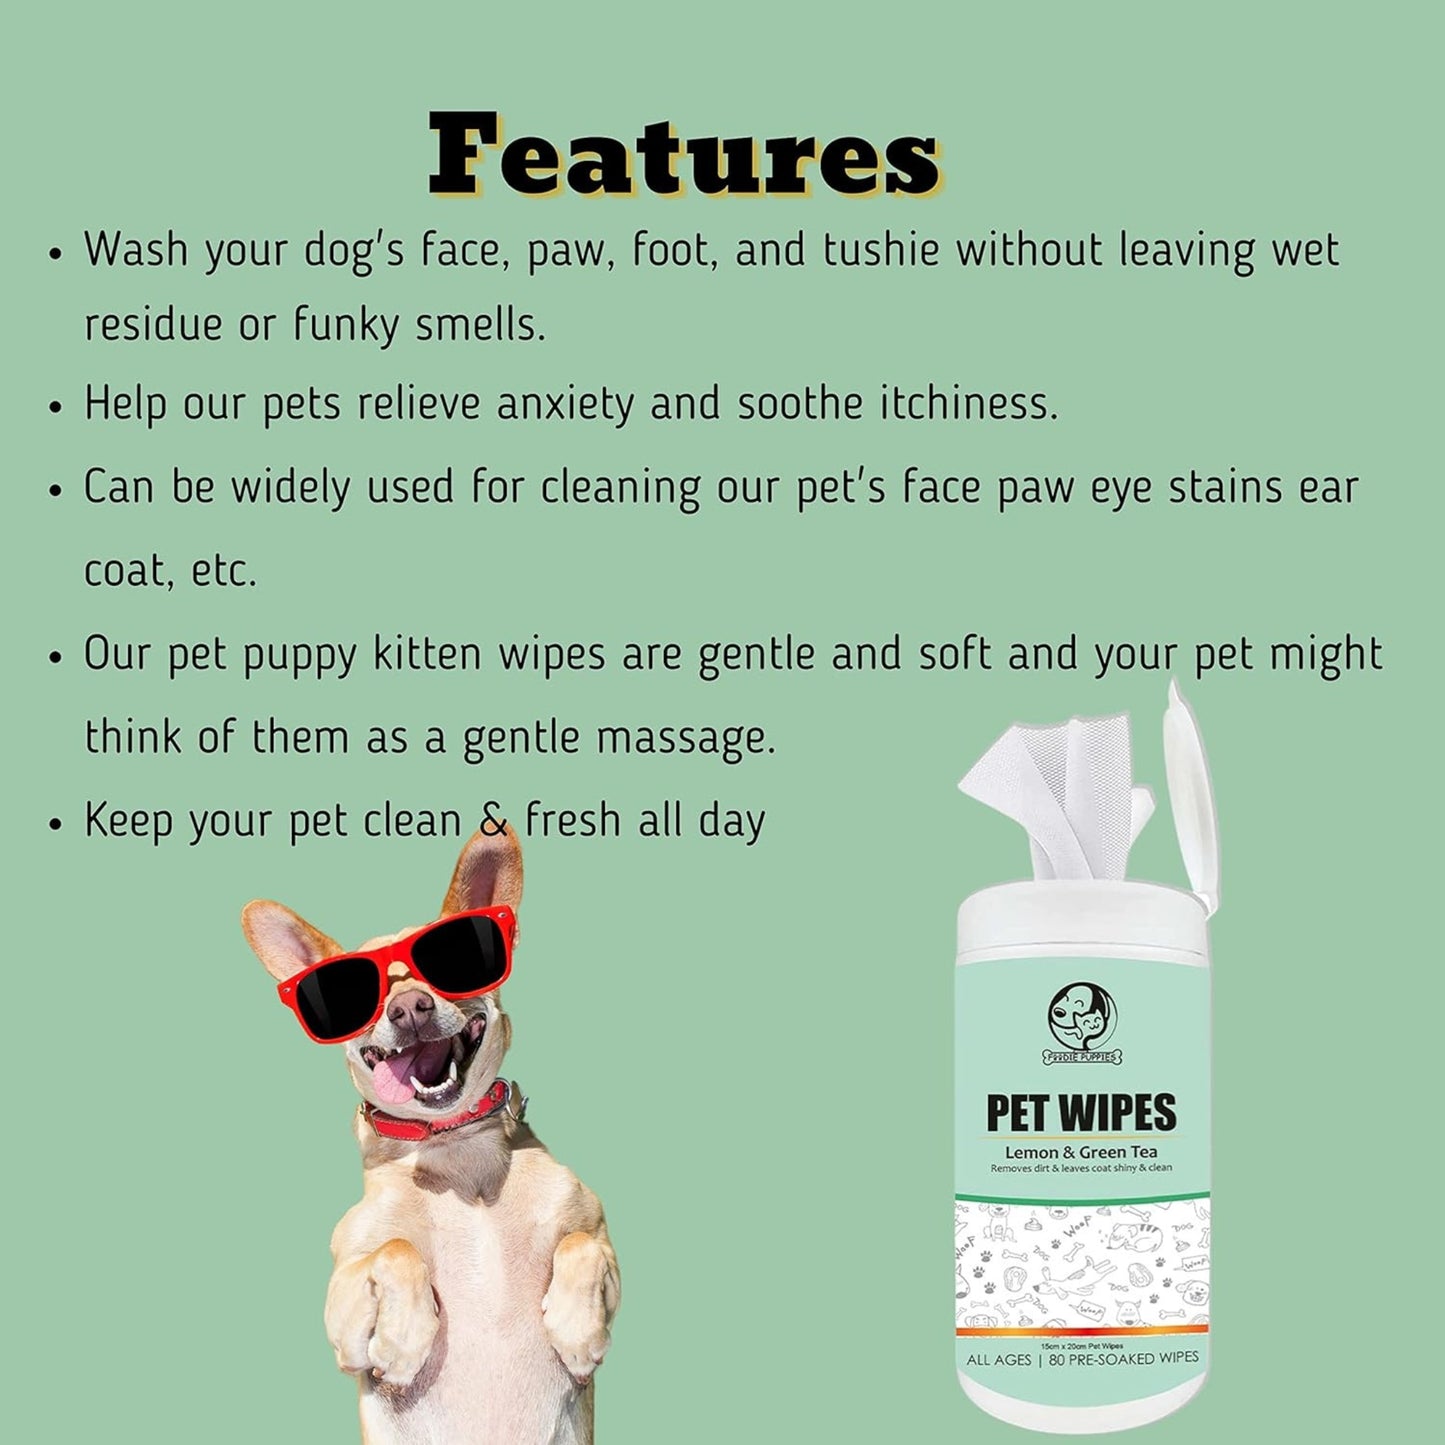 wipes for dogs